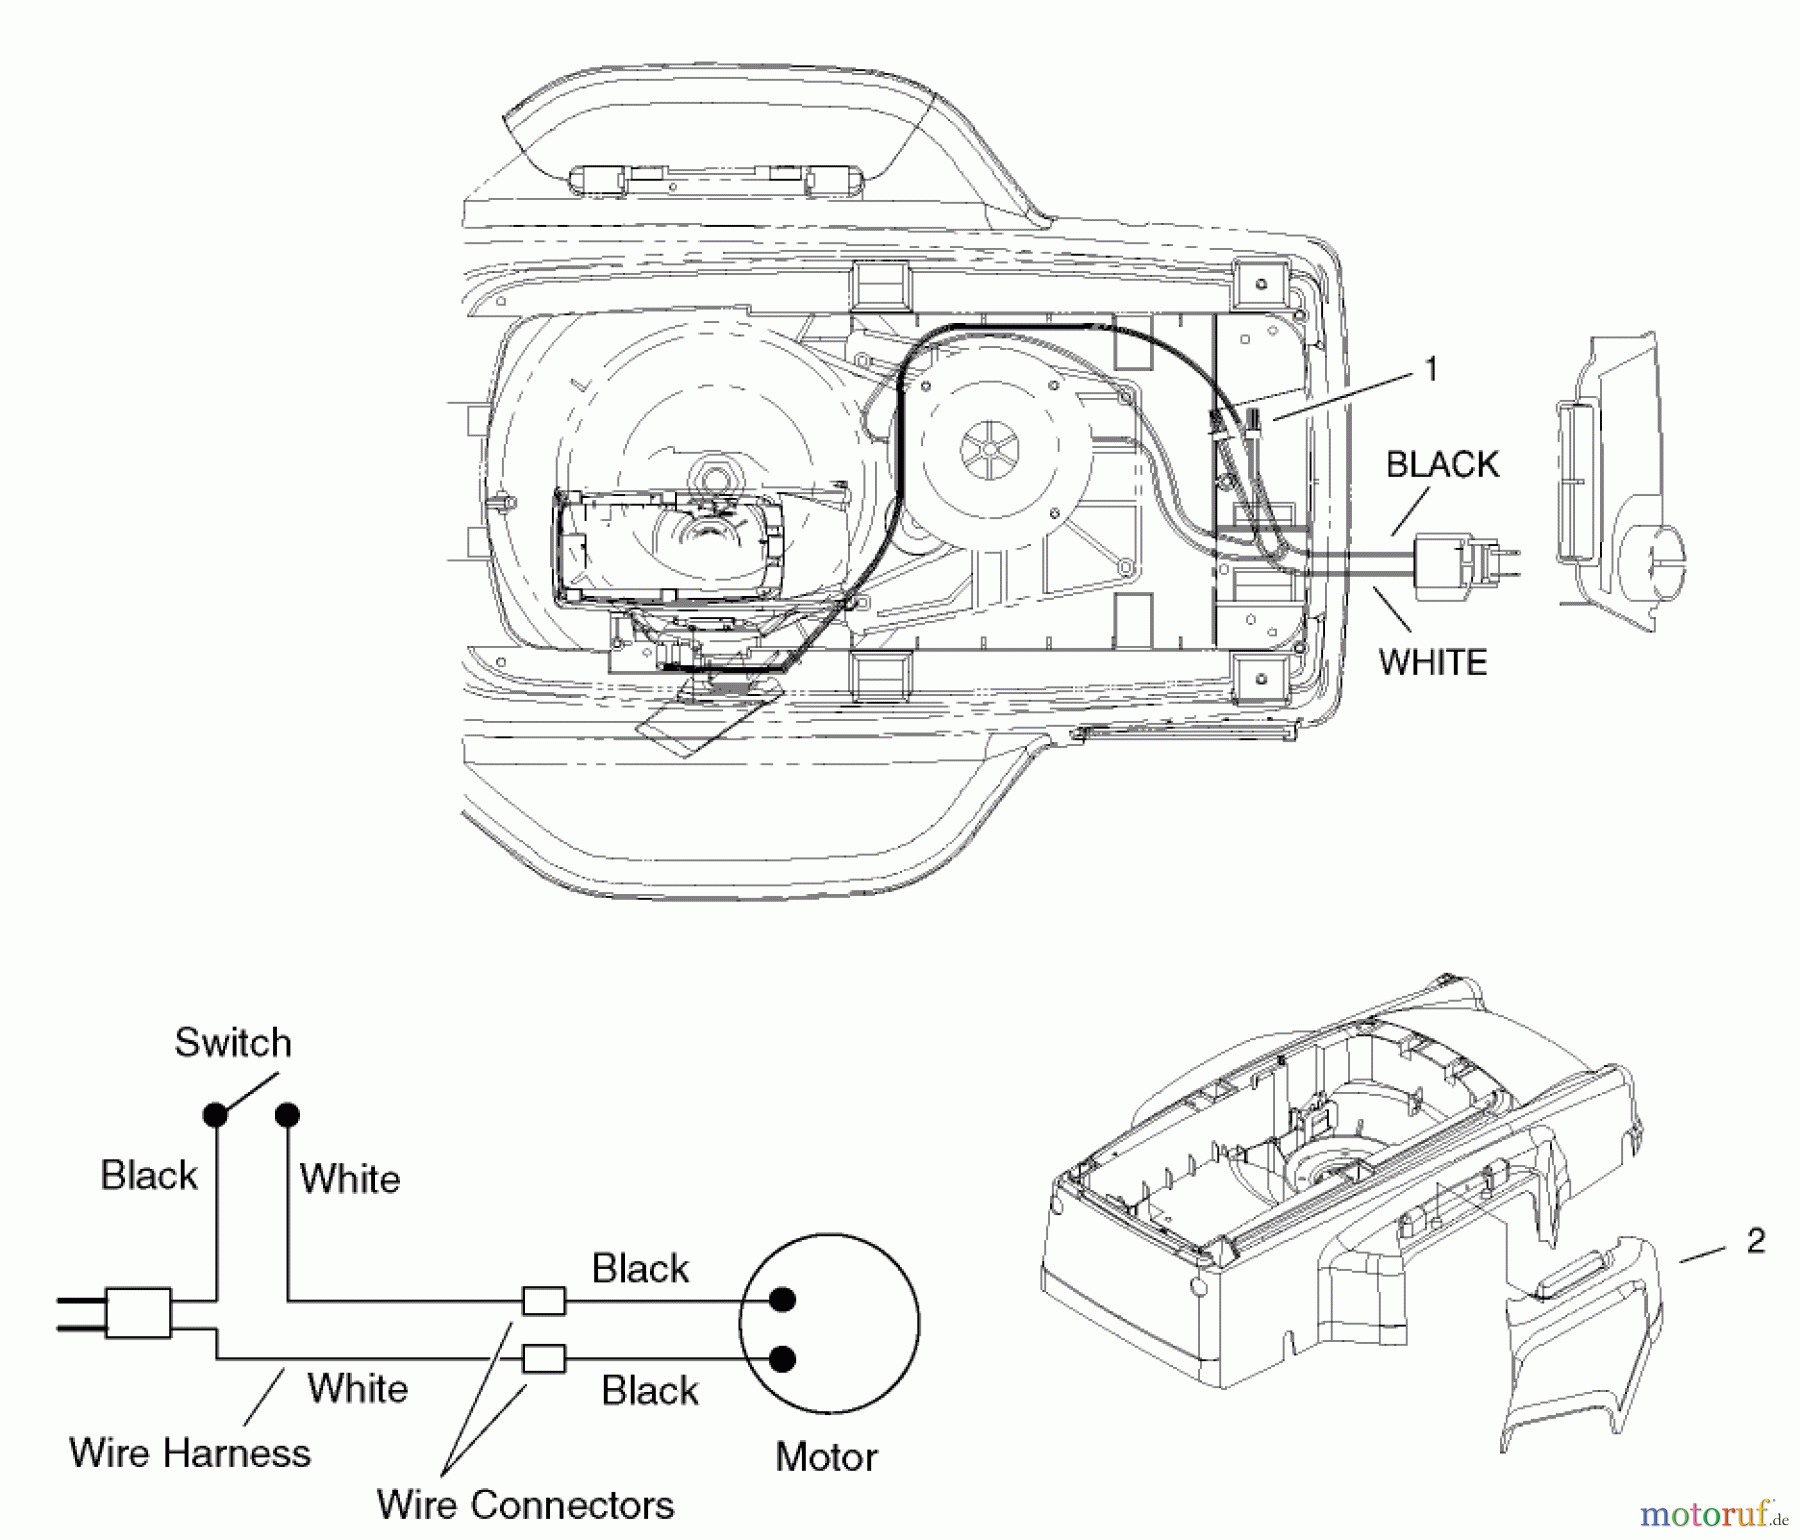  Toro Neu Mowers, Electric 20050 (E120) - Toro Carefree Recycler Electric Mower, E120, 2000 (200000001-200999999) ELECTRICAL WIRING, SCHEMATIC AND DISCHARGE CHUTE ASSEMBLY